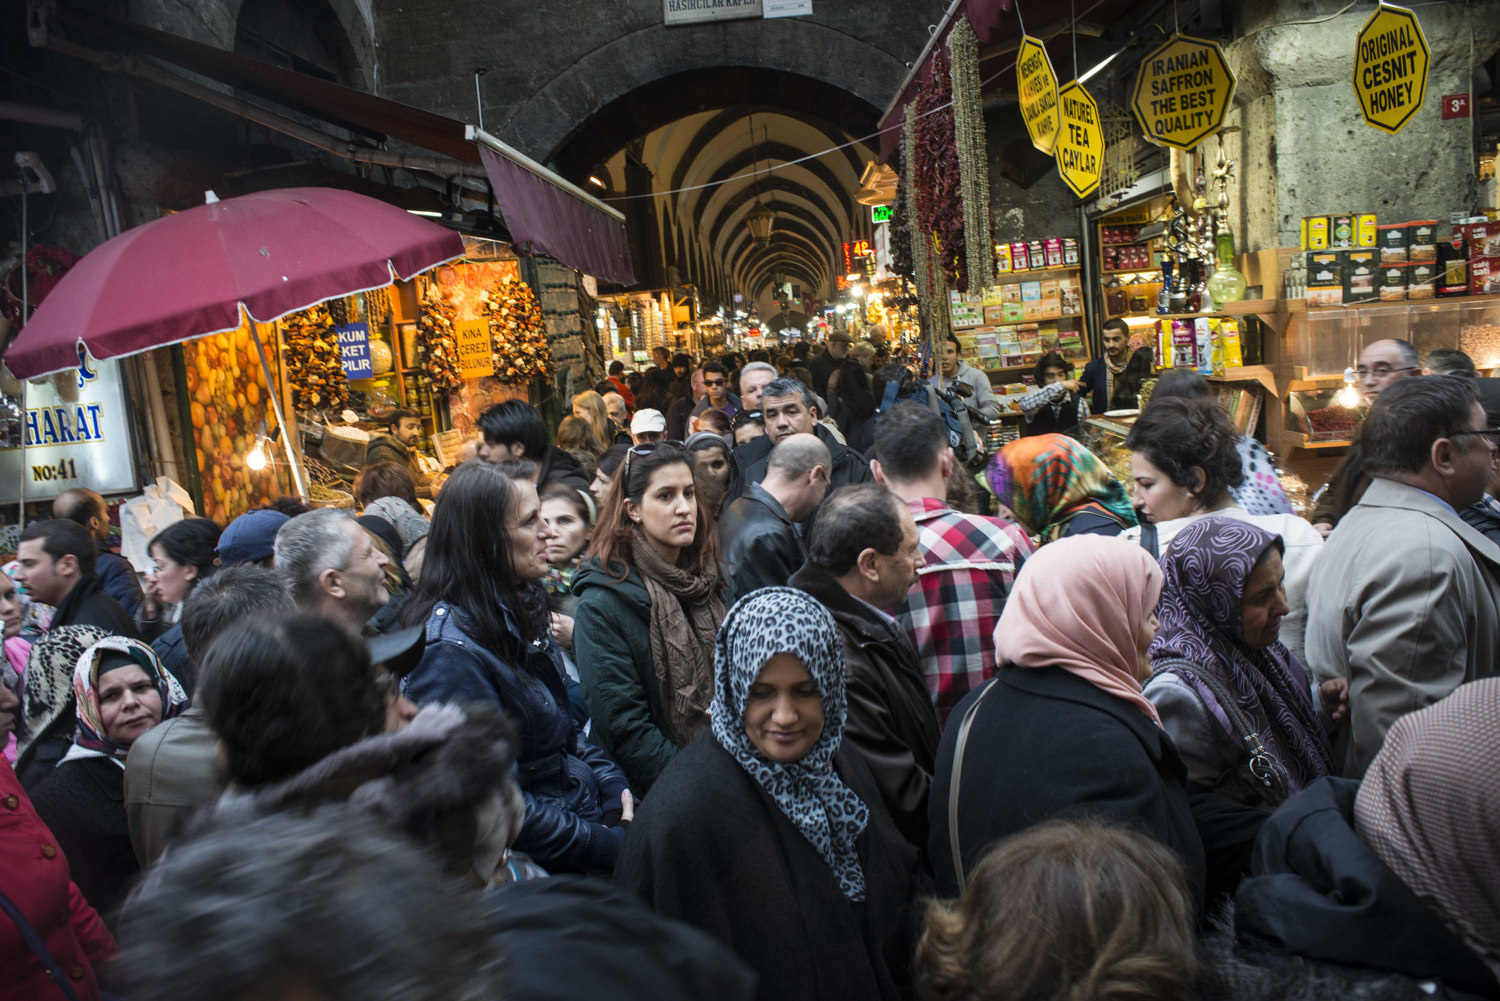  Crowds outside of the Spice Market in Istanbul Turkey. 